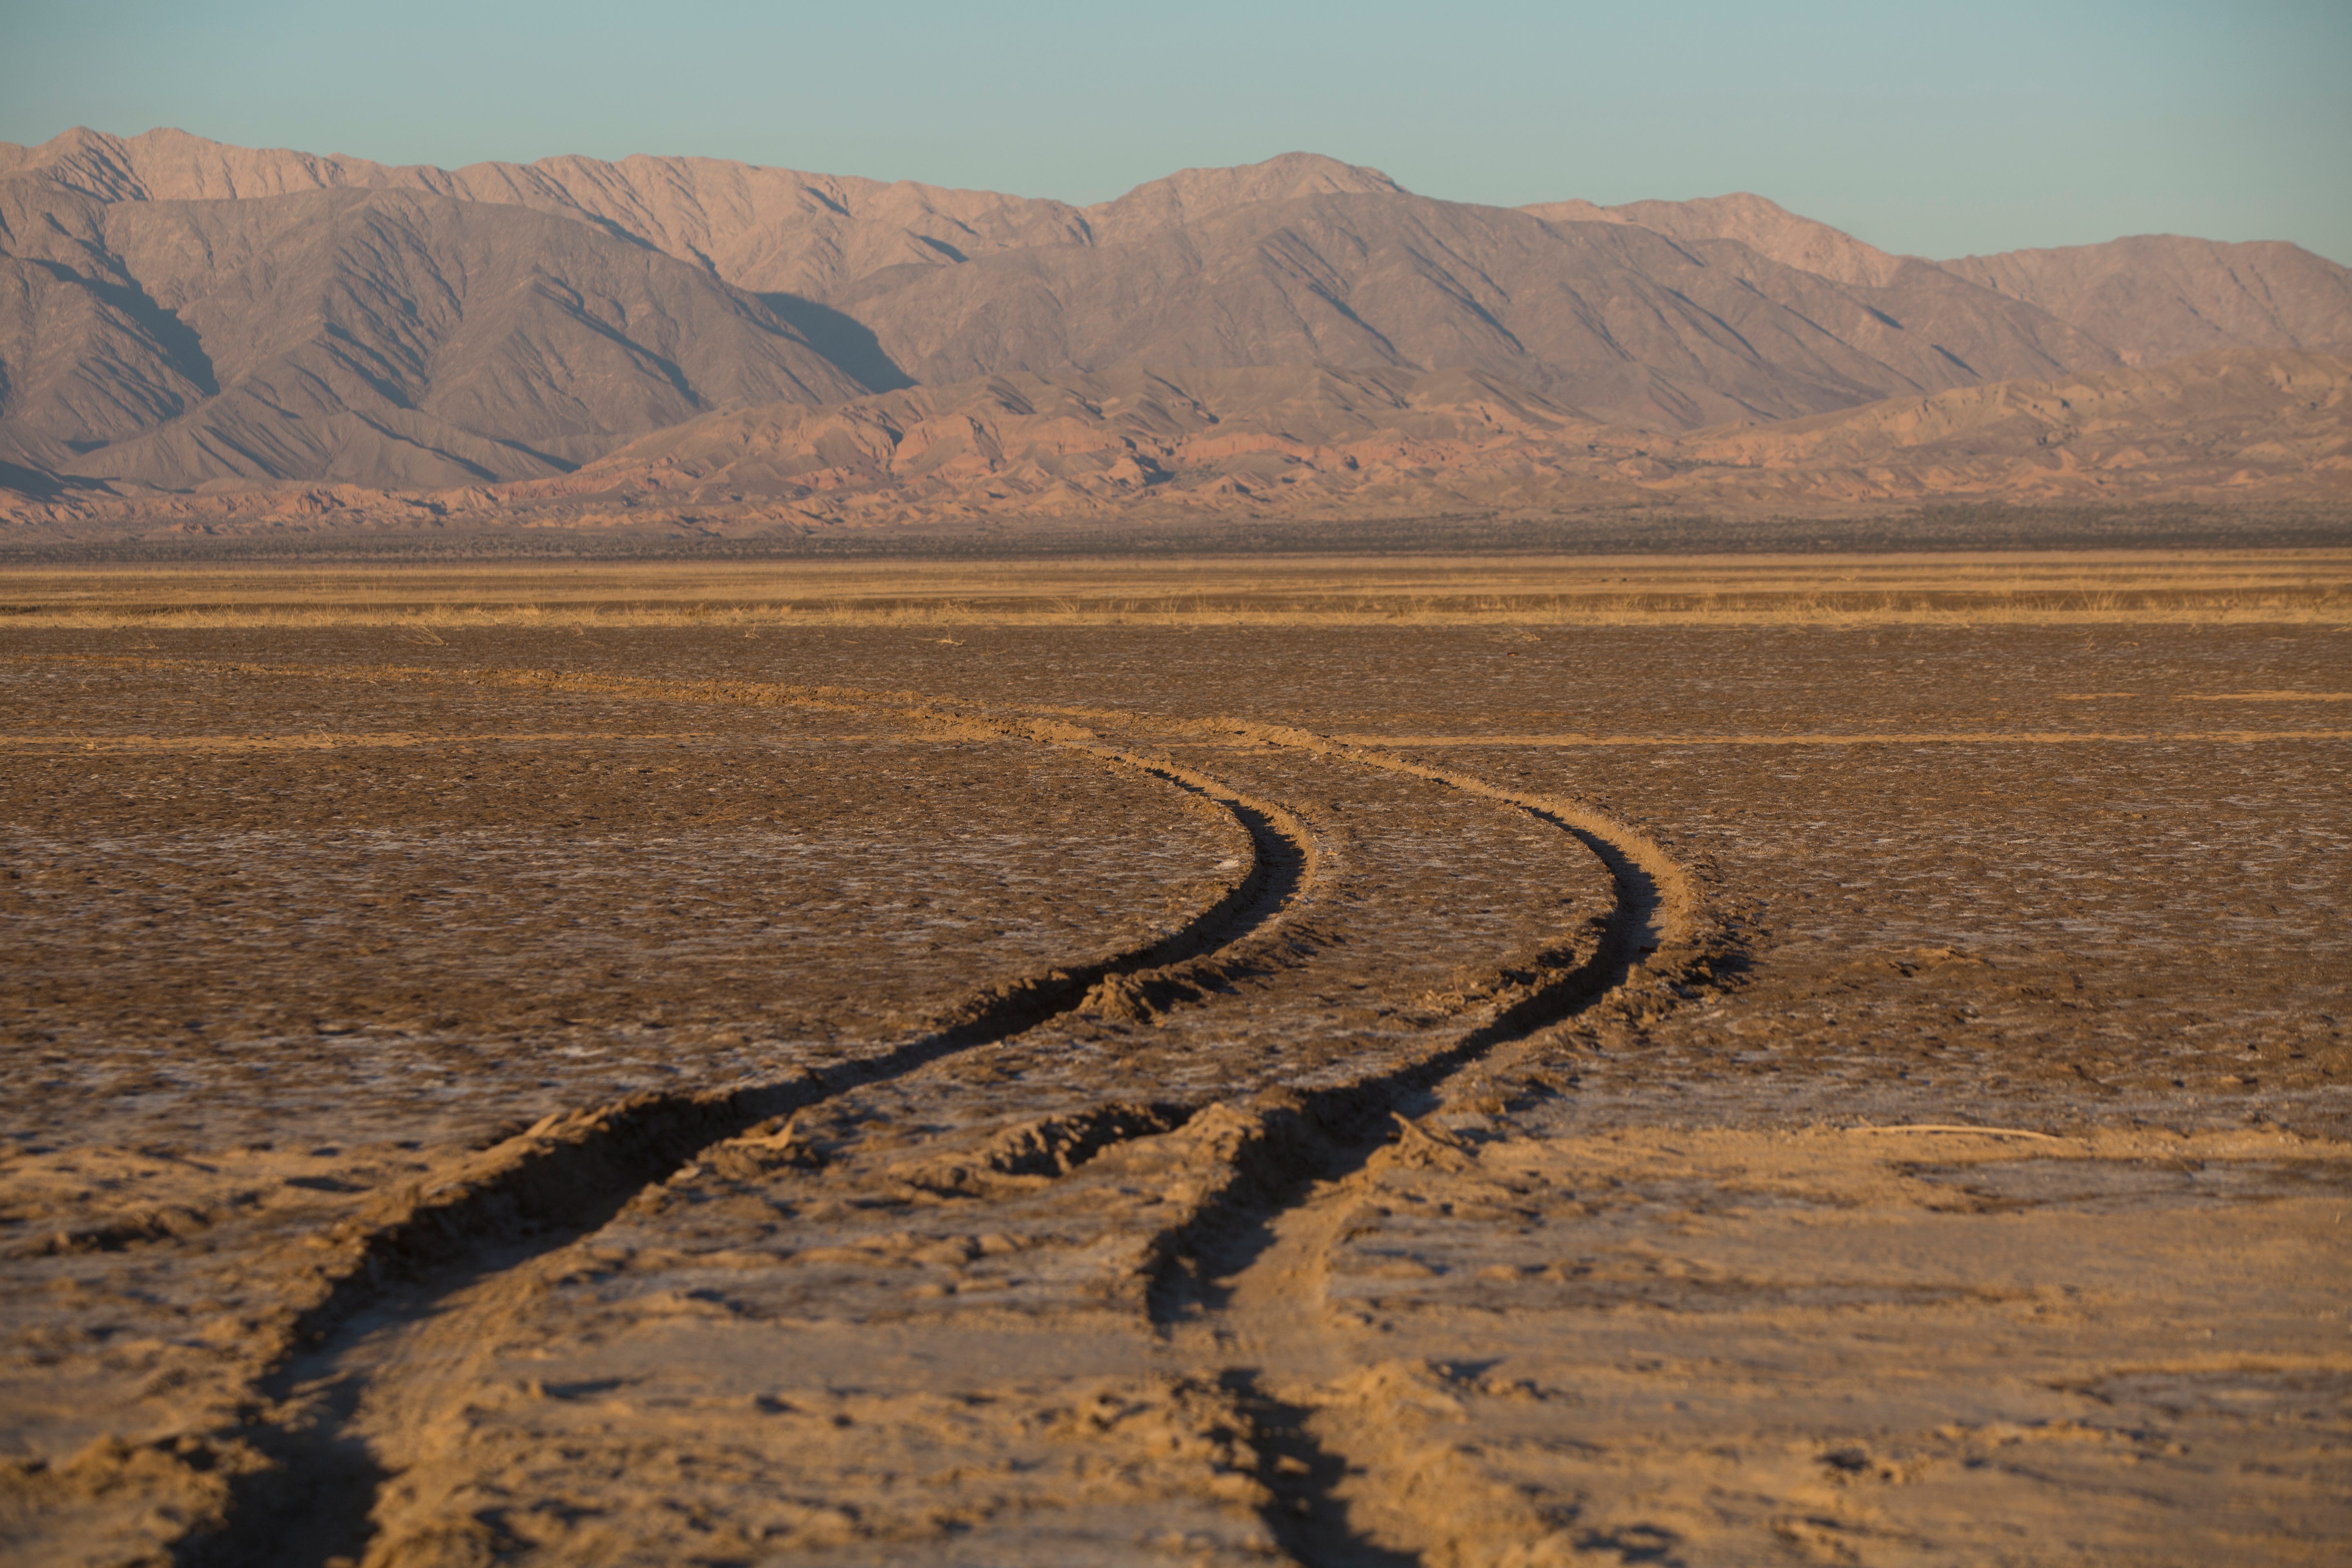 About 25 miles north of the Gulf of California, a dry lakebed called Laguna Salada sits in Baja California.